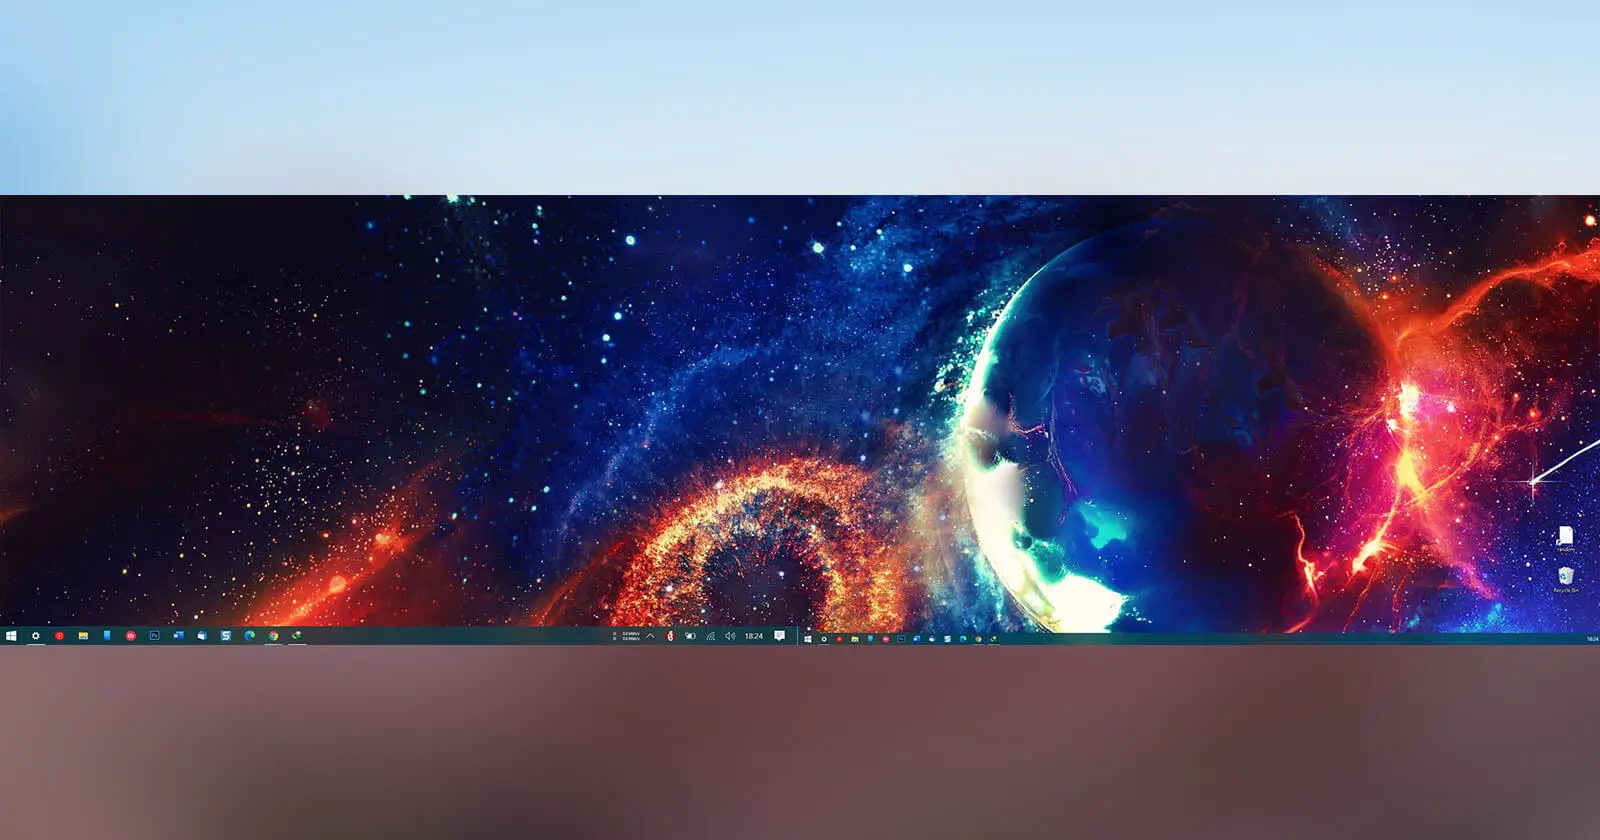 How To Stretch Desktop Background Across Two Monitors